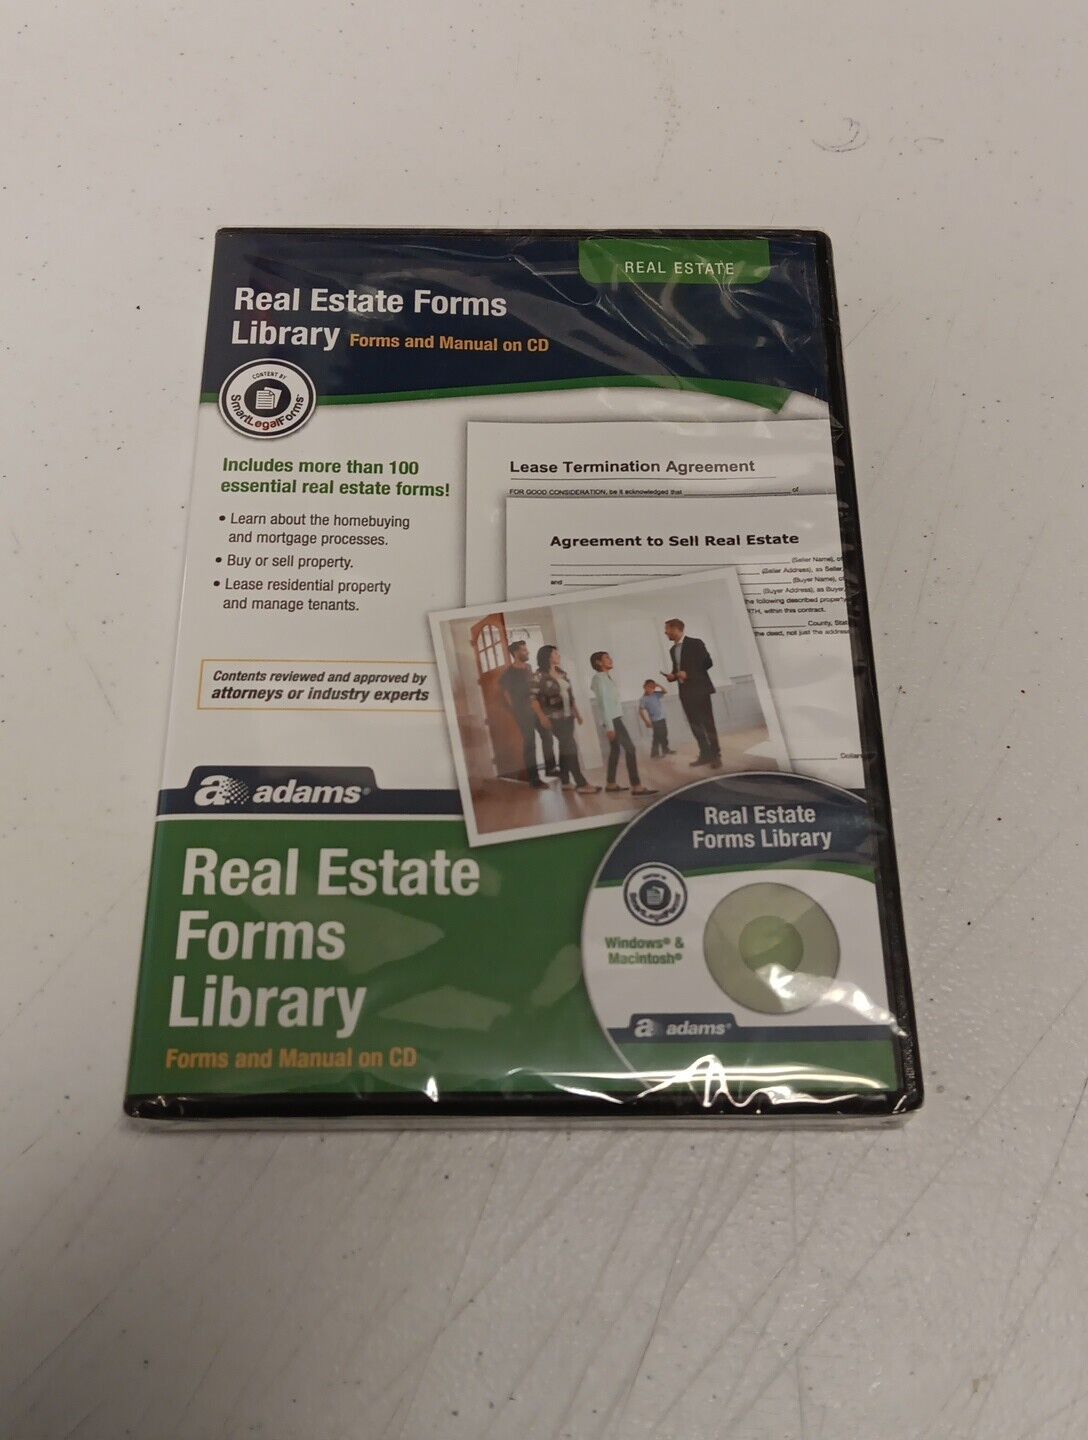 Adams Real Estate Legal Forms And Manual Library on CD Disc New Sealed SS502